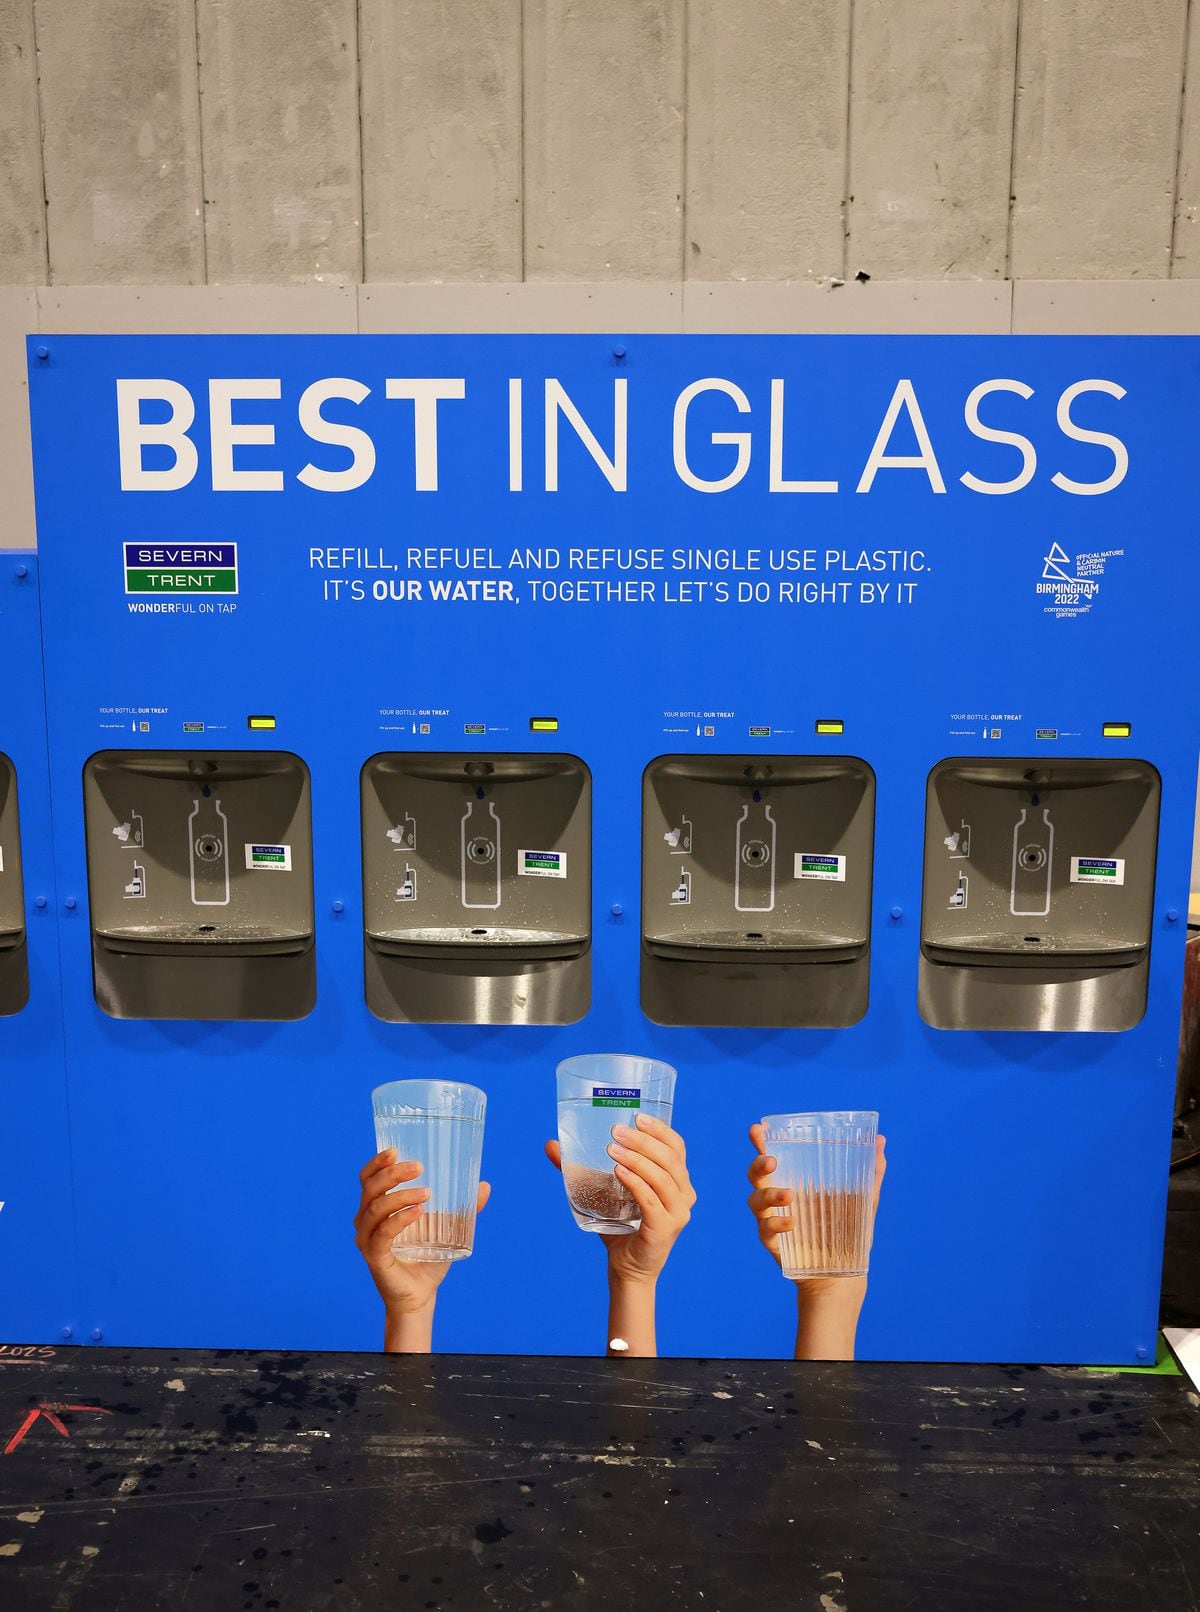 A water refill station at the NEC.